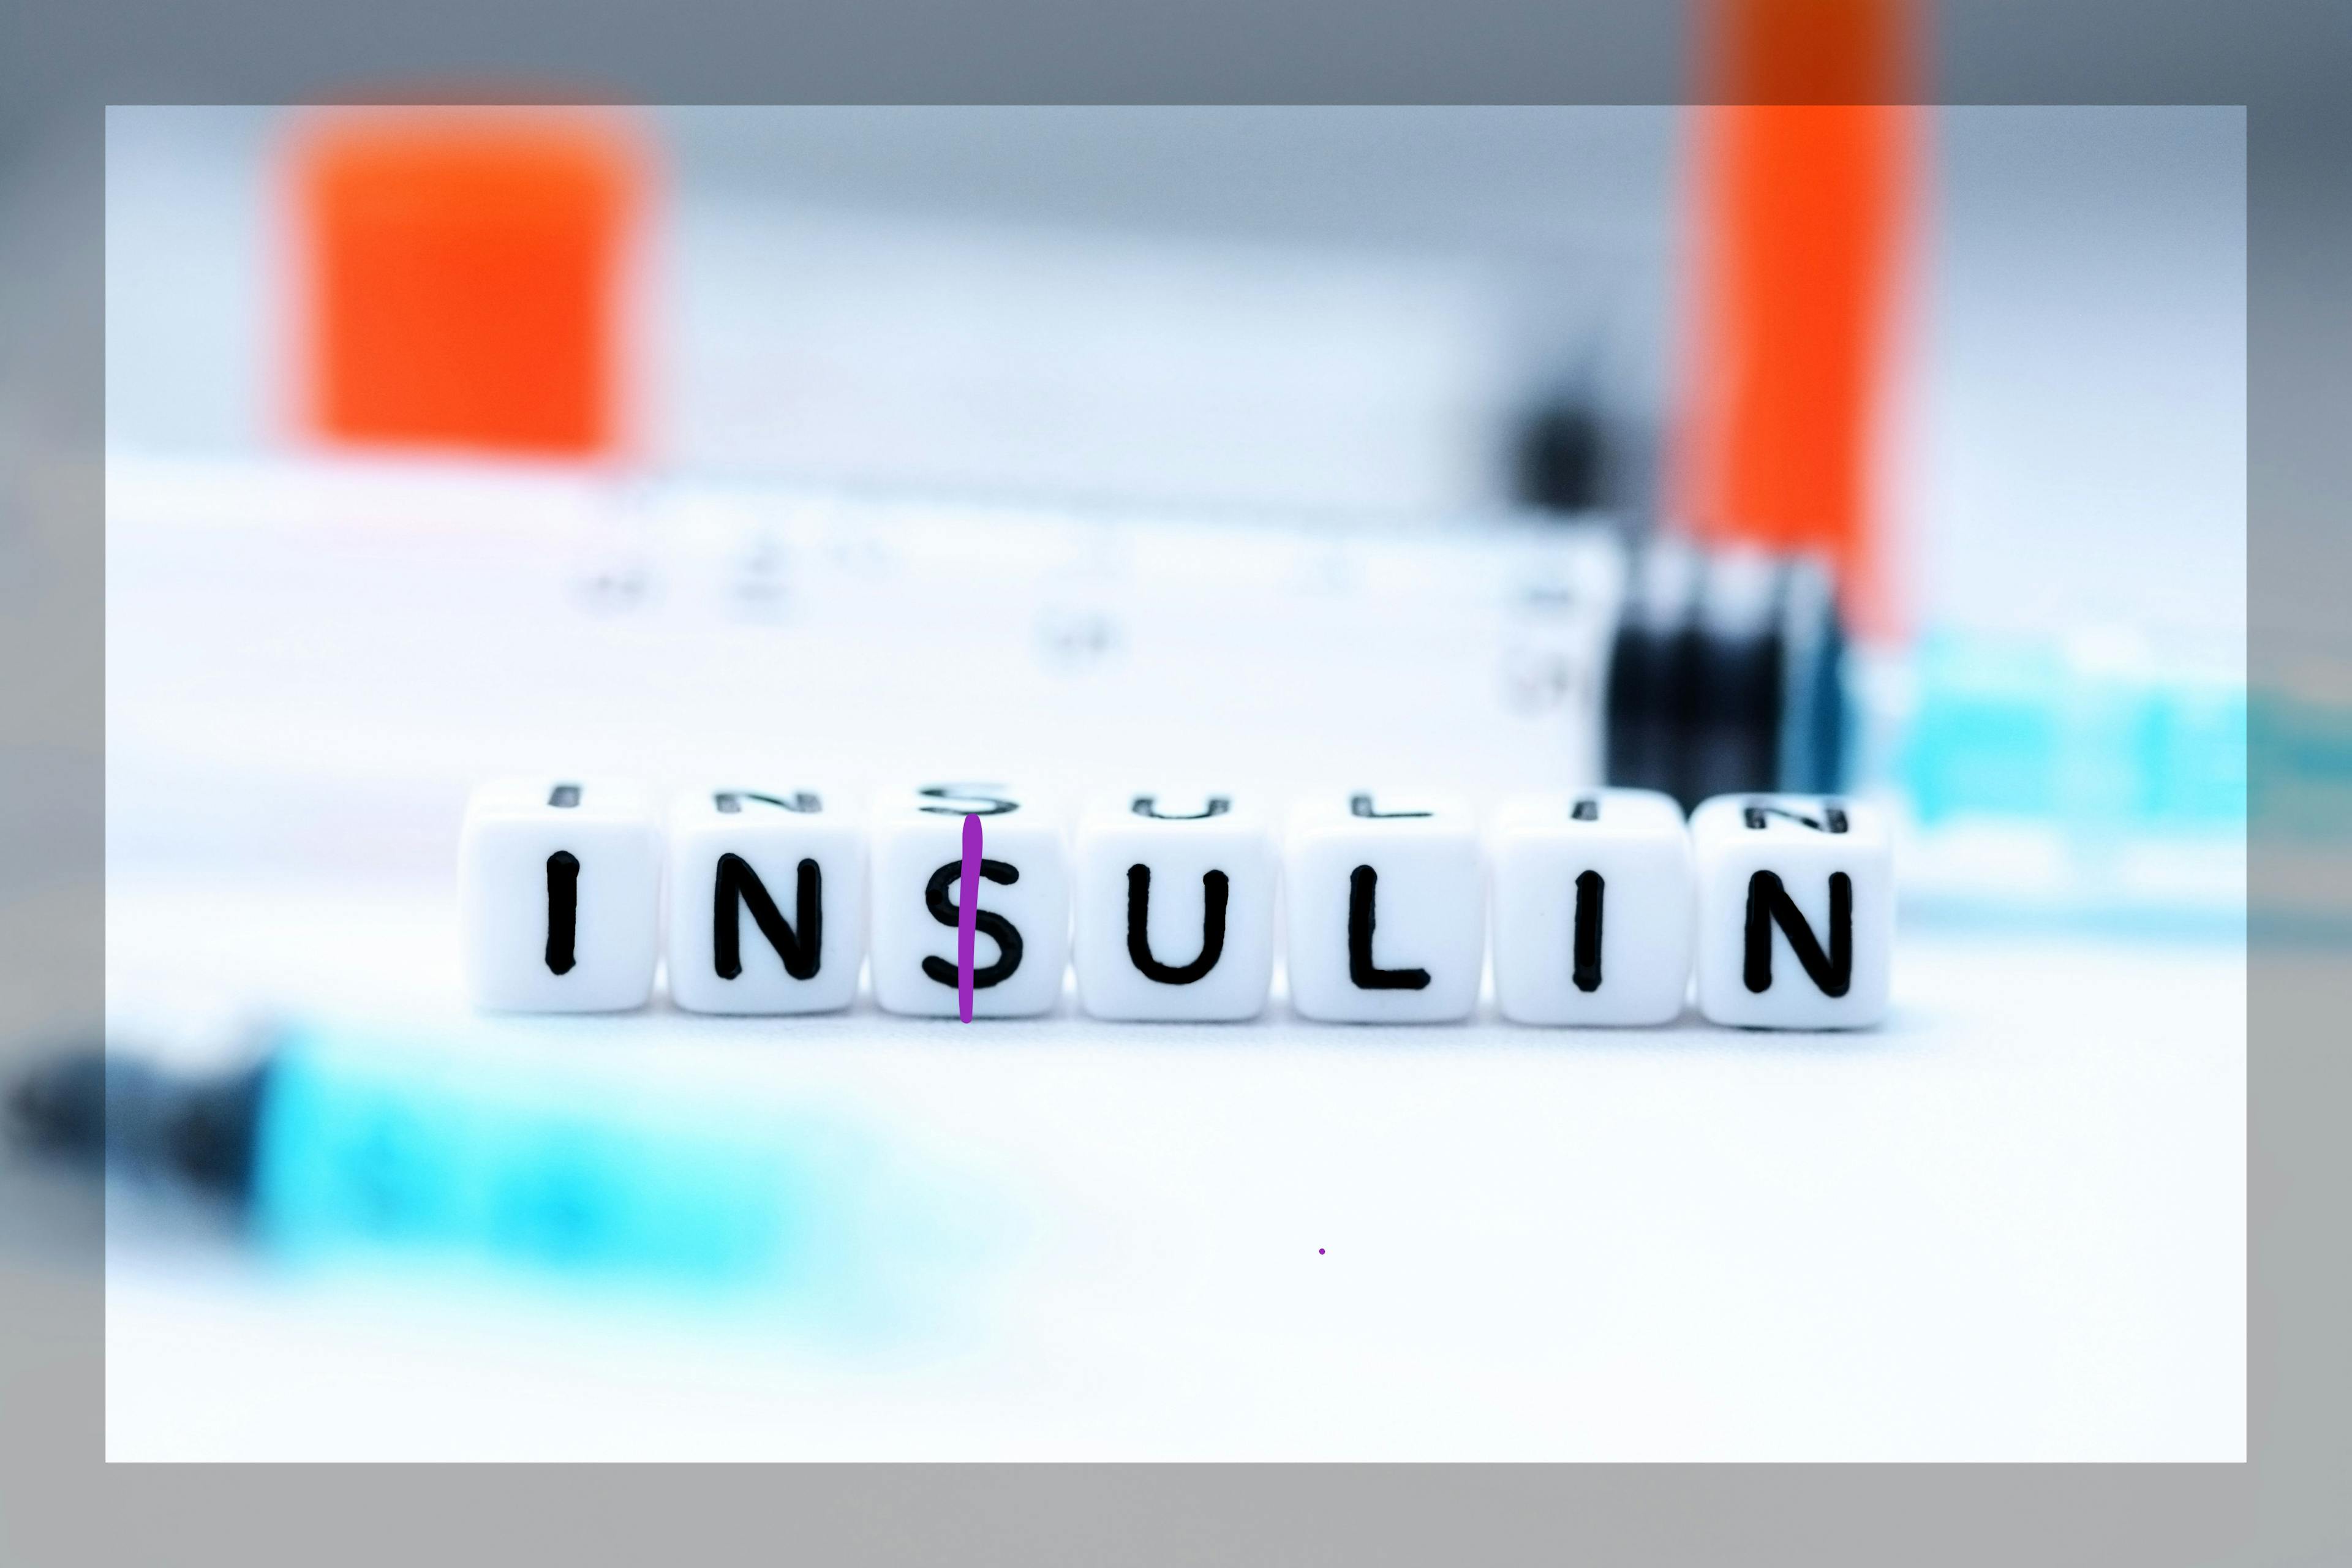 word insulin spelled out on cubes | Image credit: © adrian_ilie865 stock.adobe.com